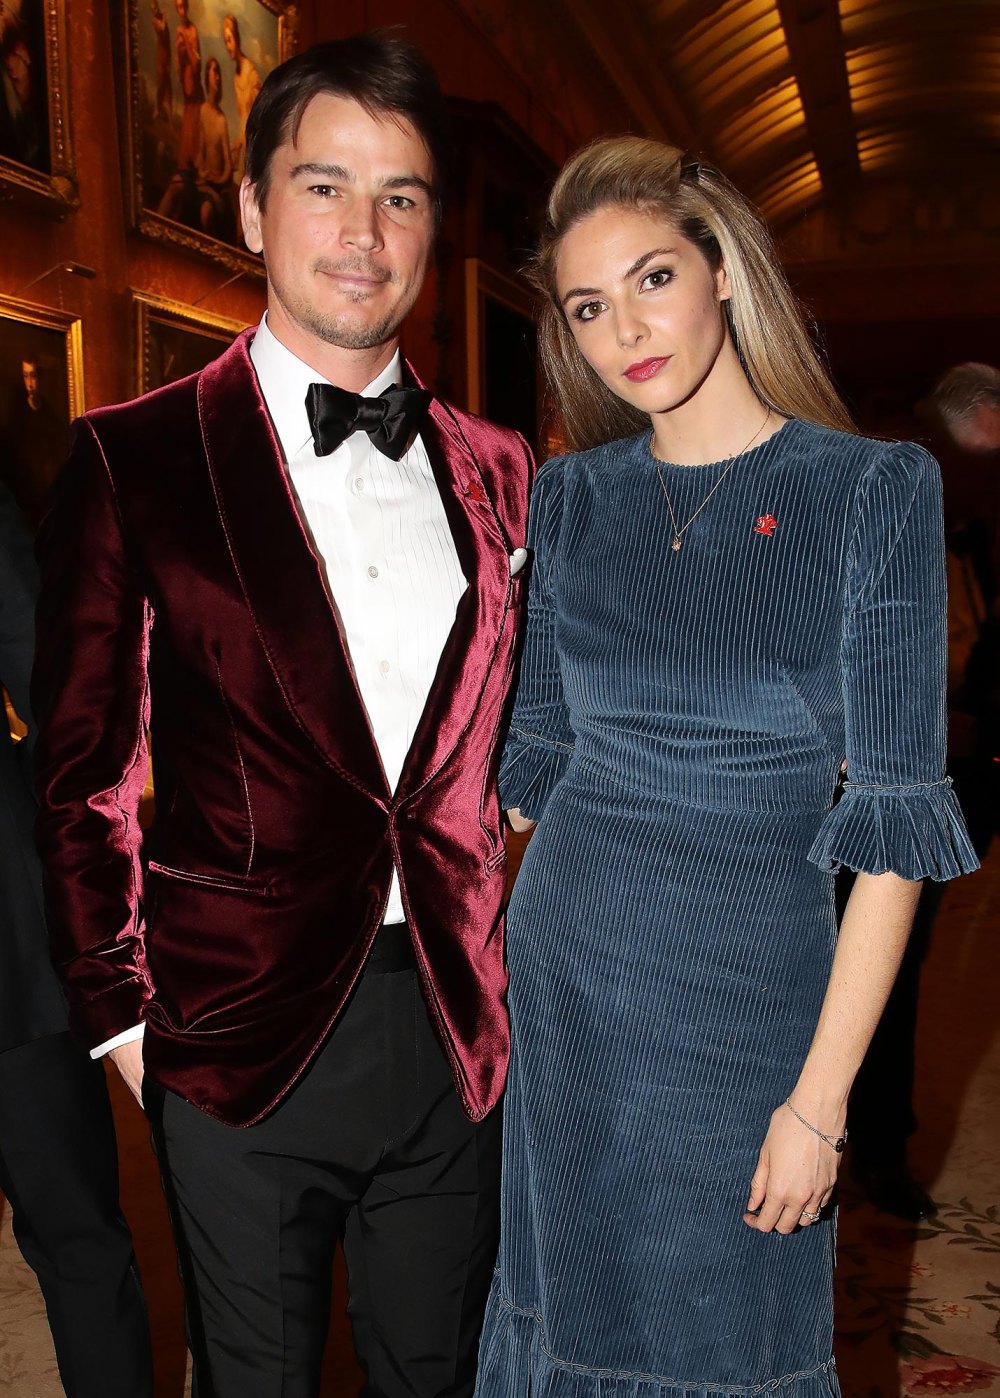 Josh Hartnett and wife Tamsin Egerton welcomed baby No. 4 privately